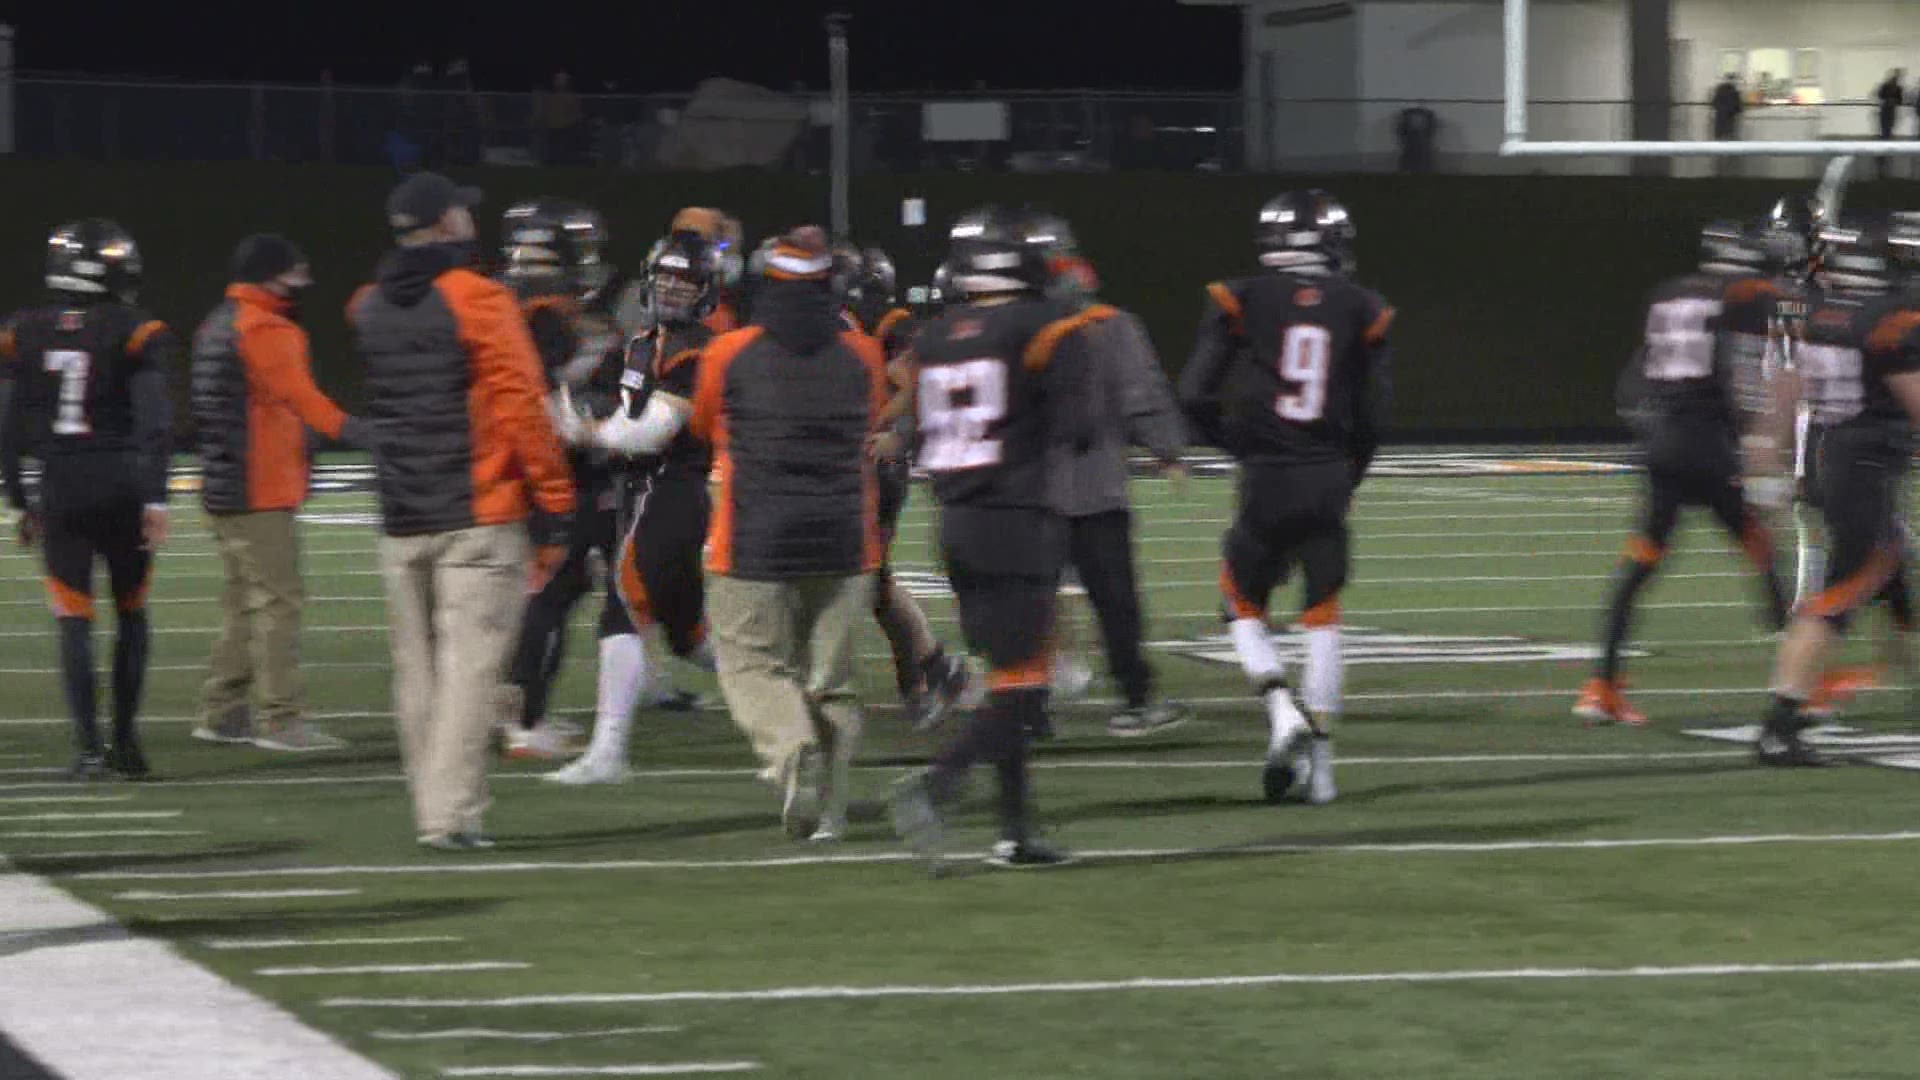 Highlights from Division 3 playoff action between Kenowa Hills and Middleville TK.